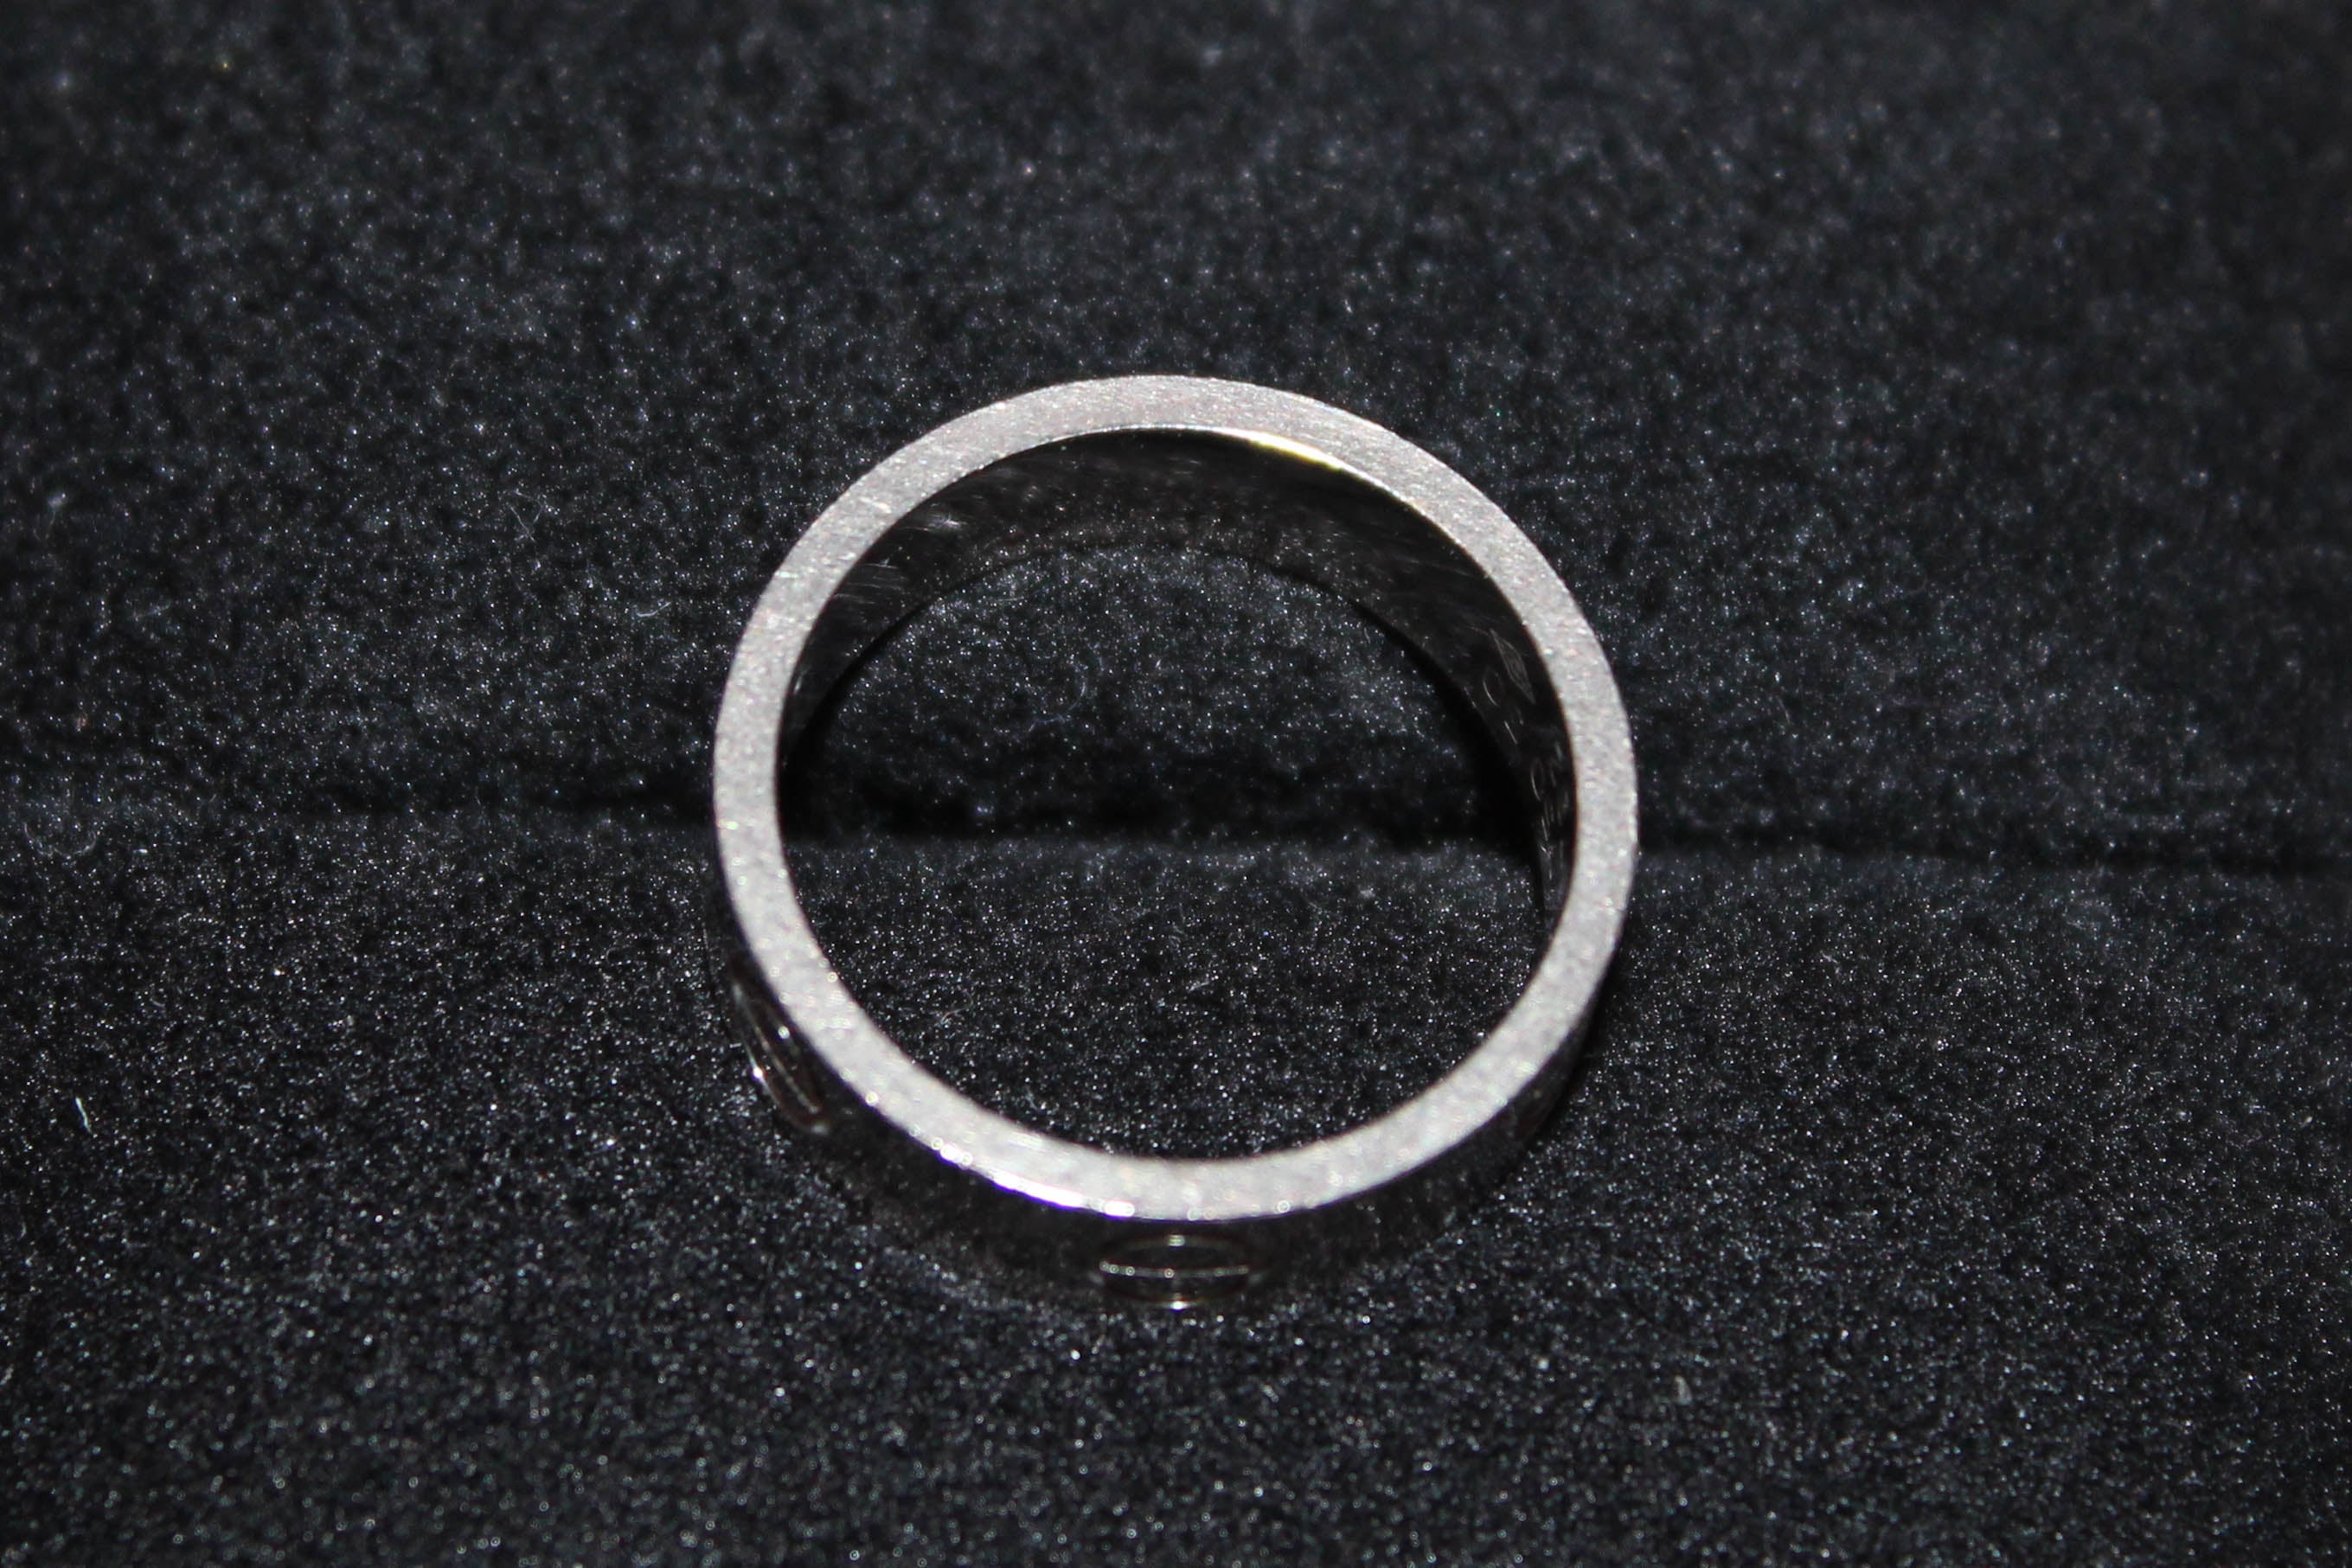 Authentic Cartier 18K White Gold LOVE Ring Size 5